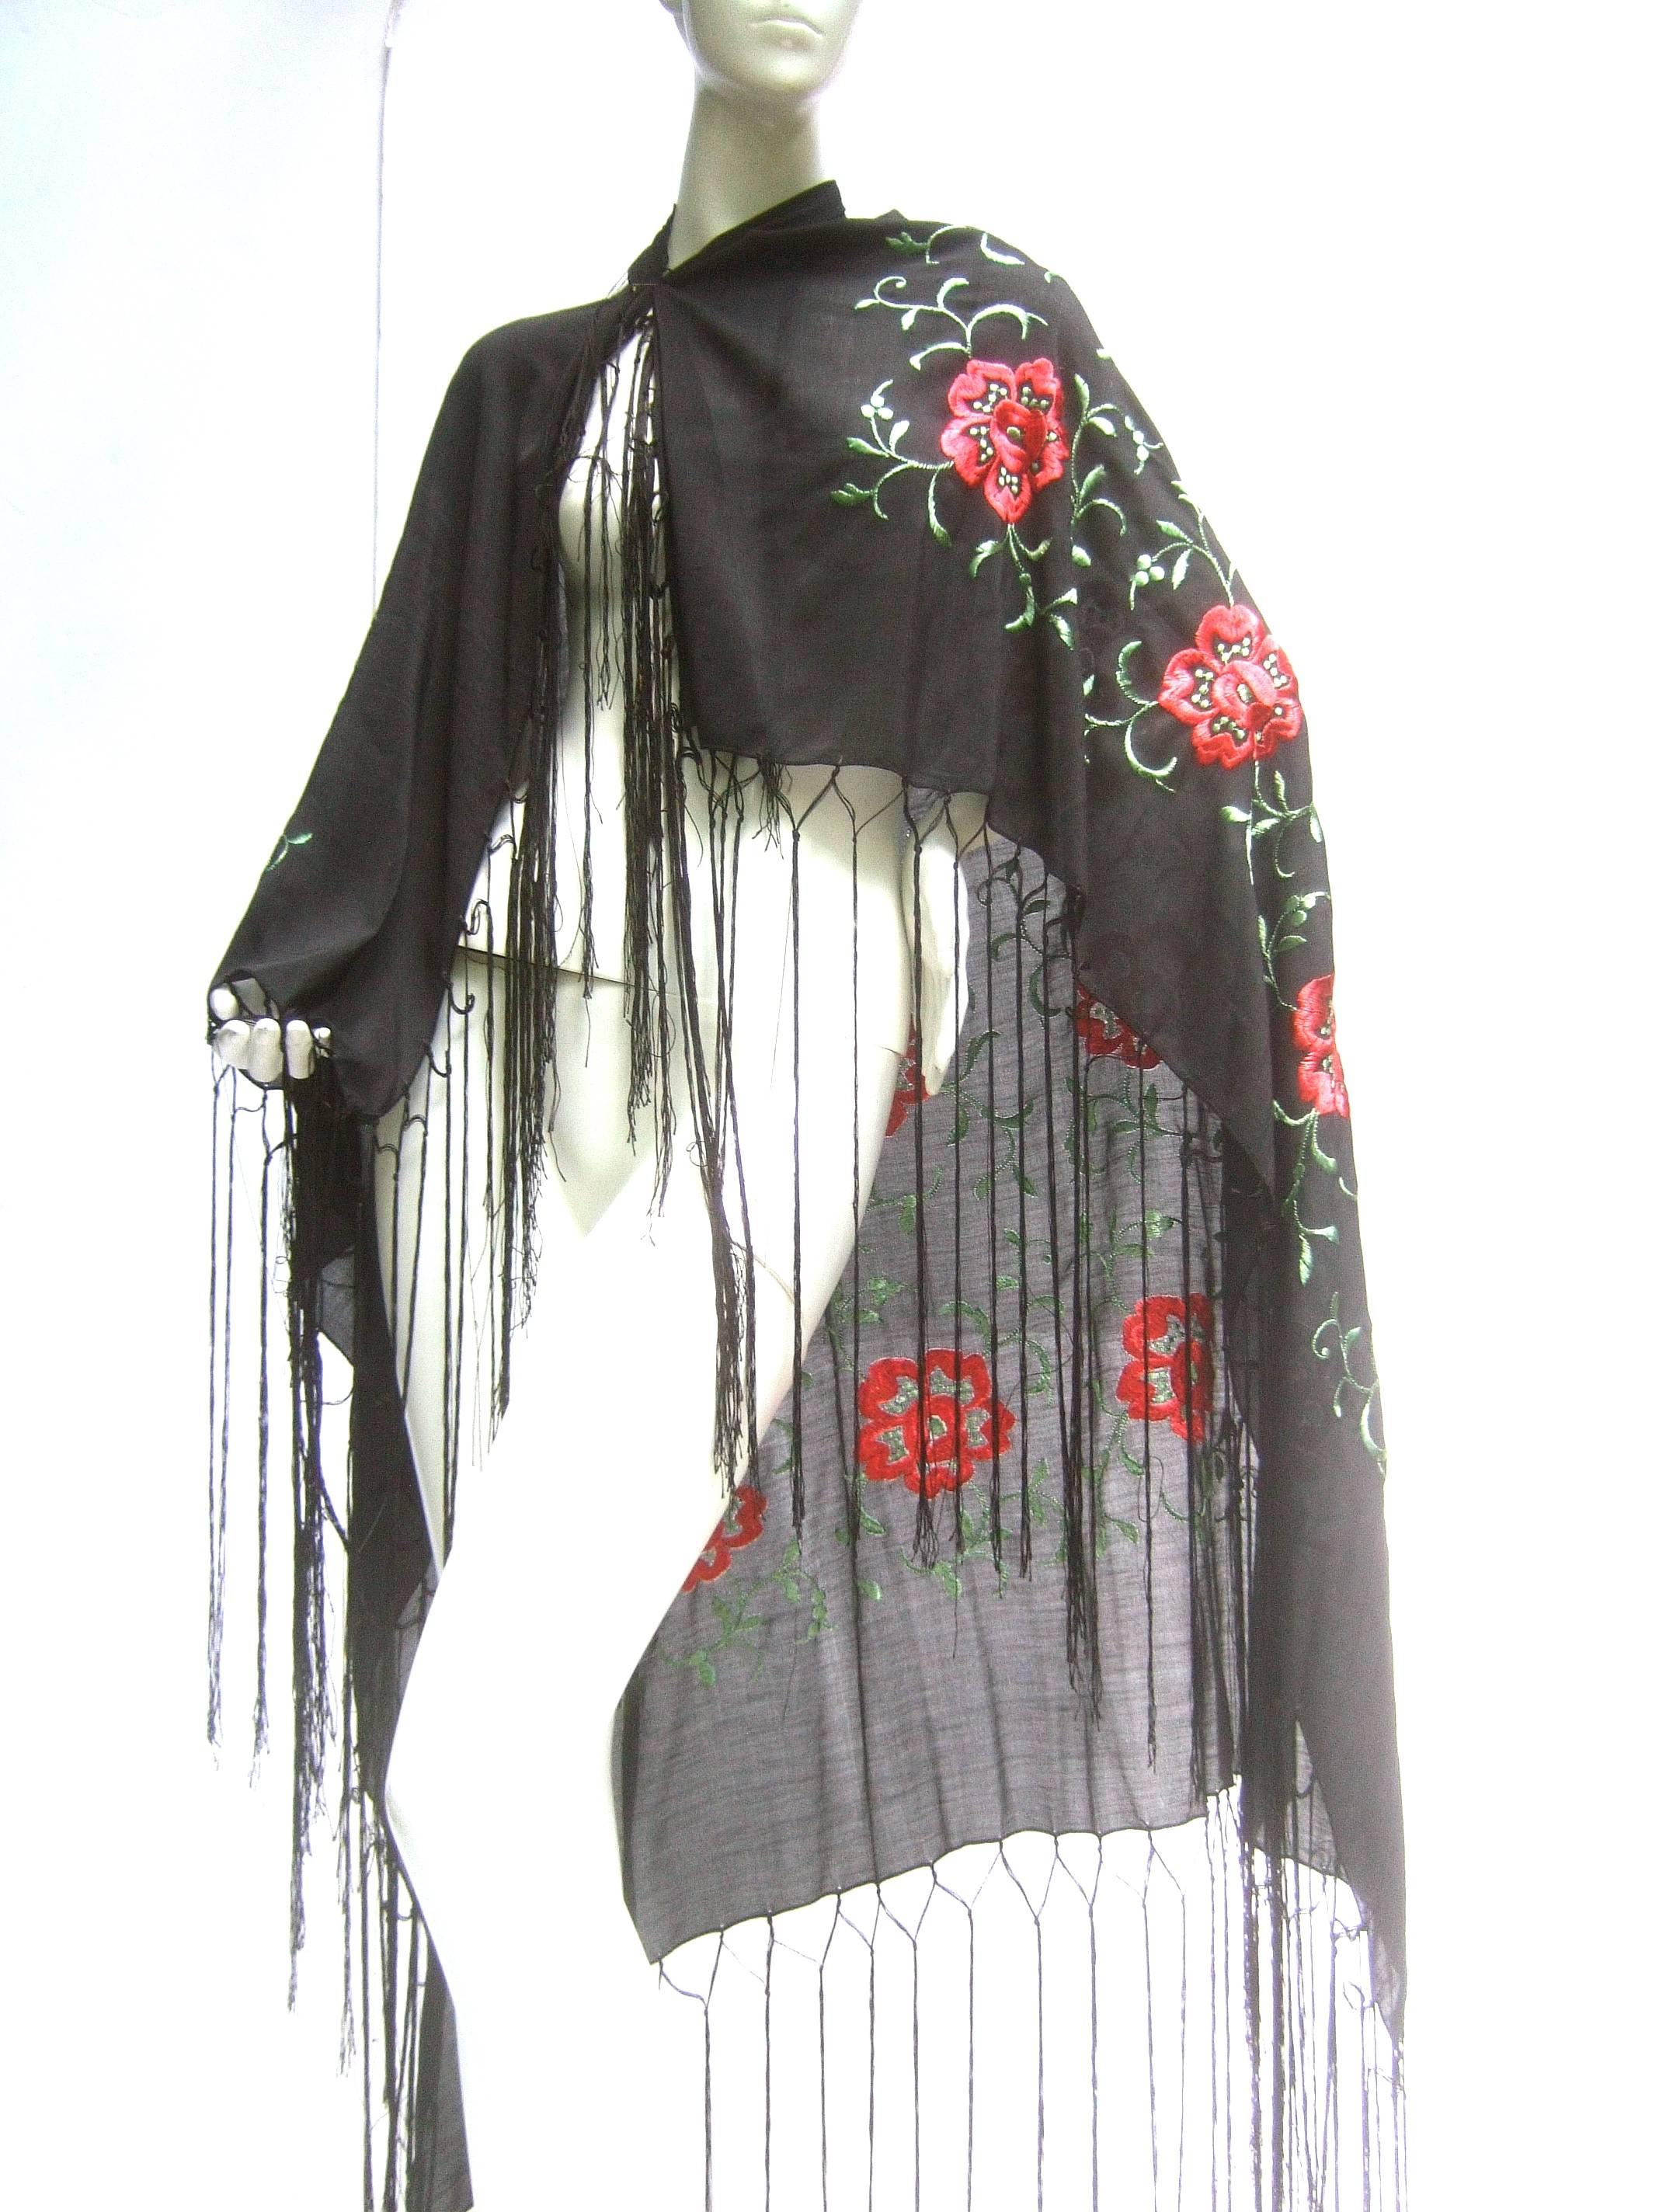 Exotic embroidered black floral fringe silk shawl c 1960 
The elegant fringe shawl is embellished with a 
series of red embroidered flowers accented 
with sinuous embroidered green leaves 

The sheer light weight silk fabric has a luxurious